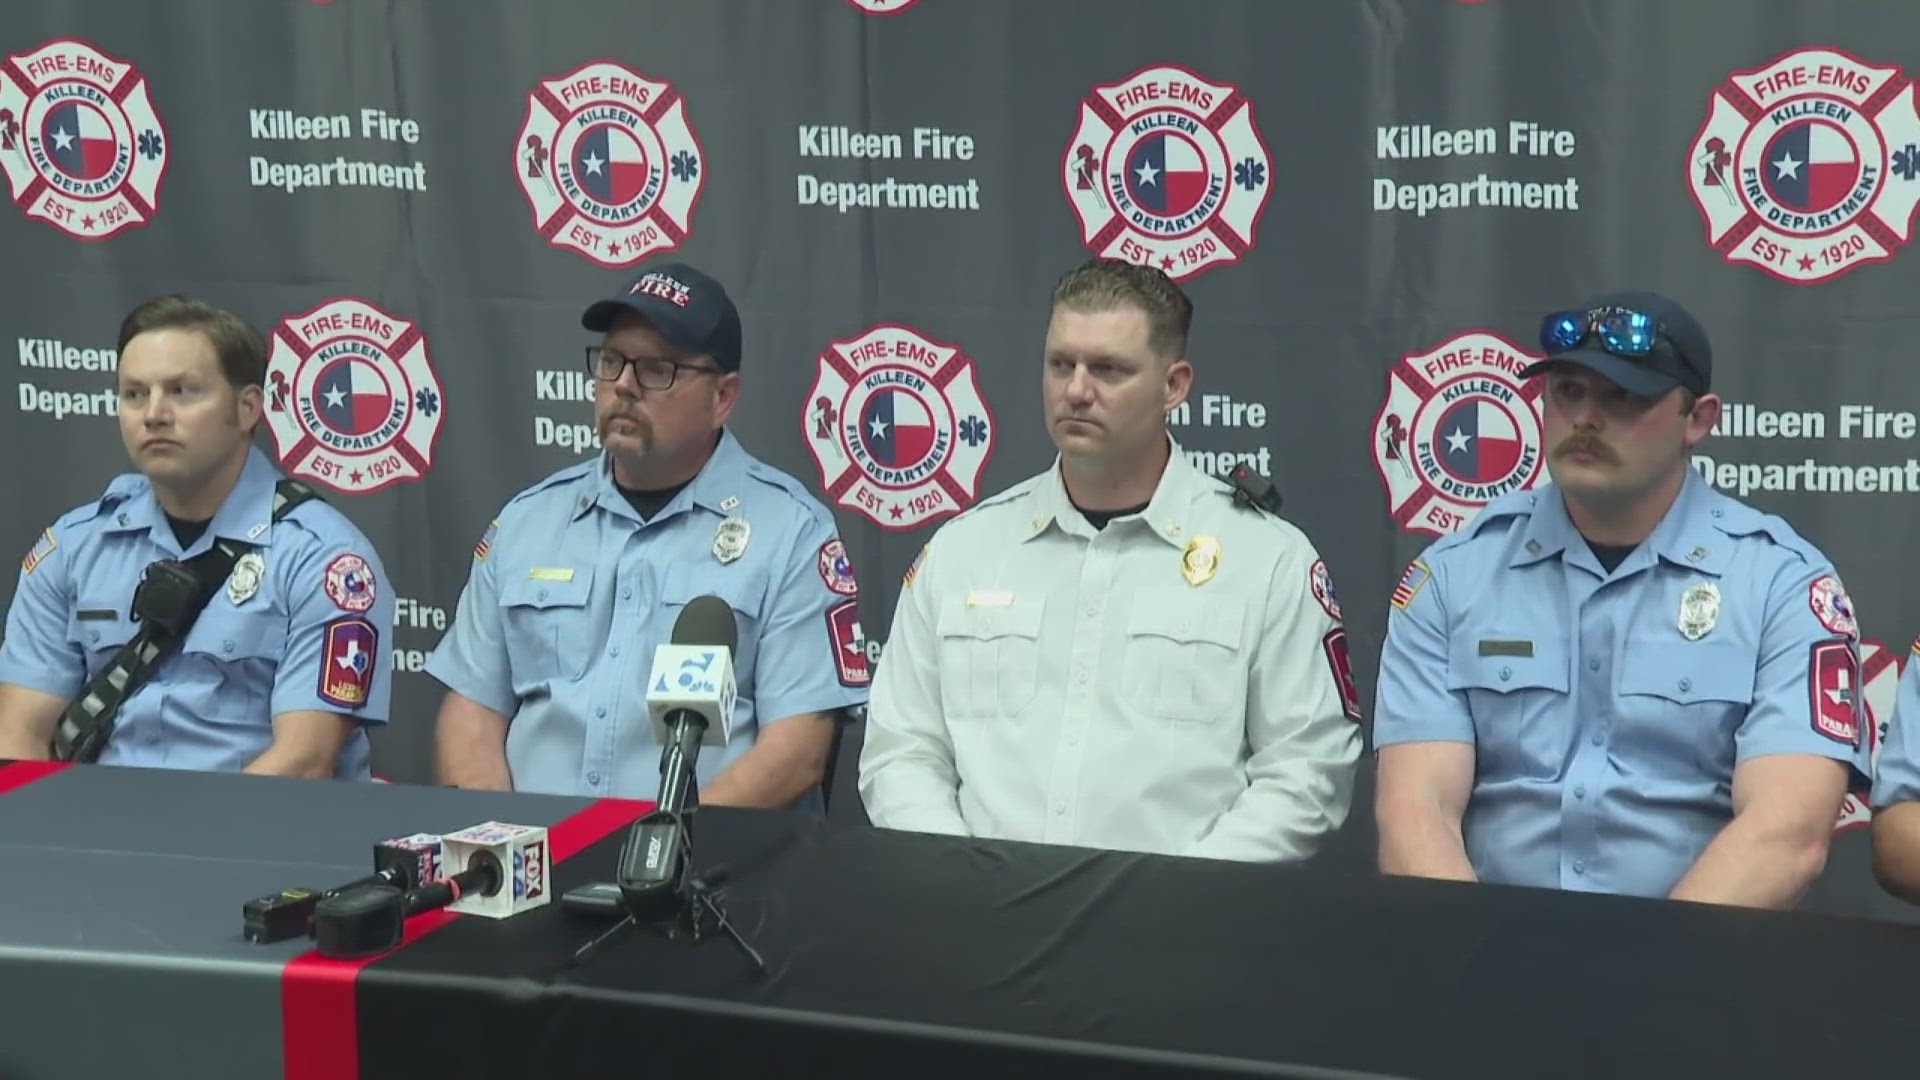 After many days spent battling the Smokehouse Creek fire, six Killeen firefighters held a press conference to share their insight upon returning home.